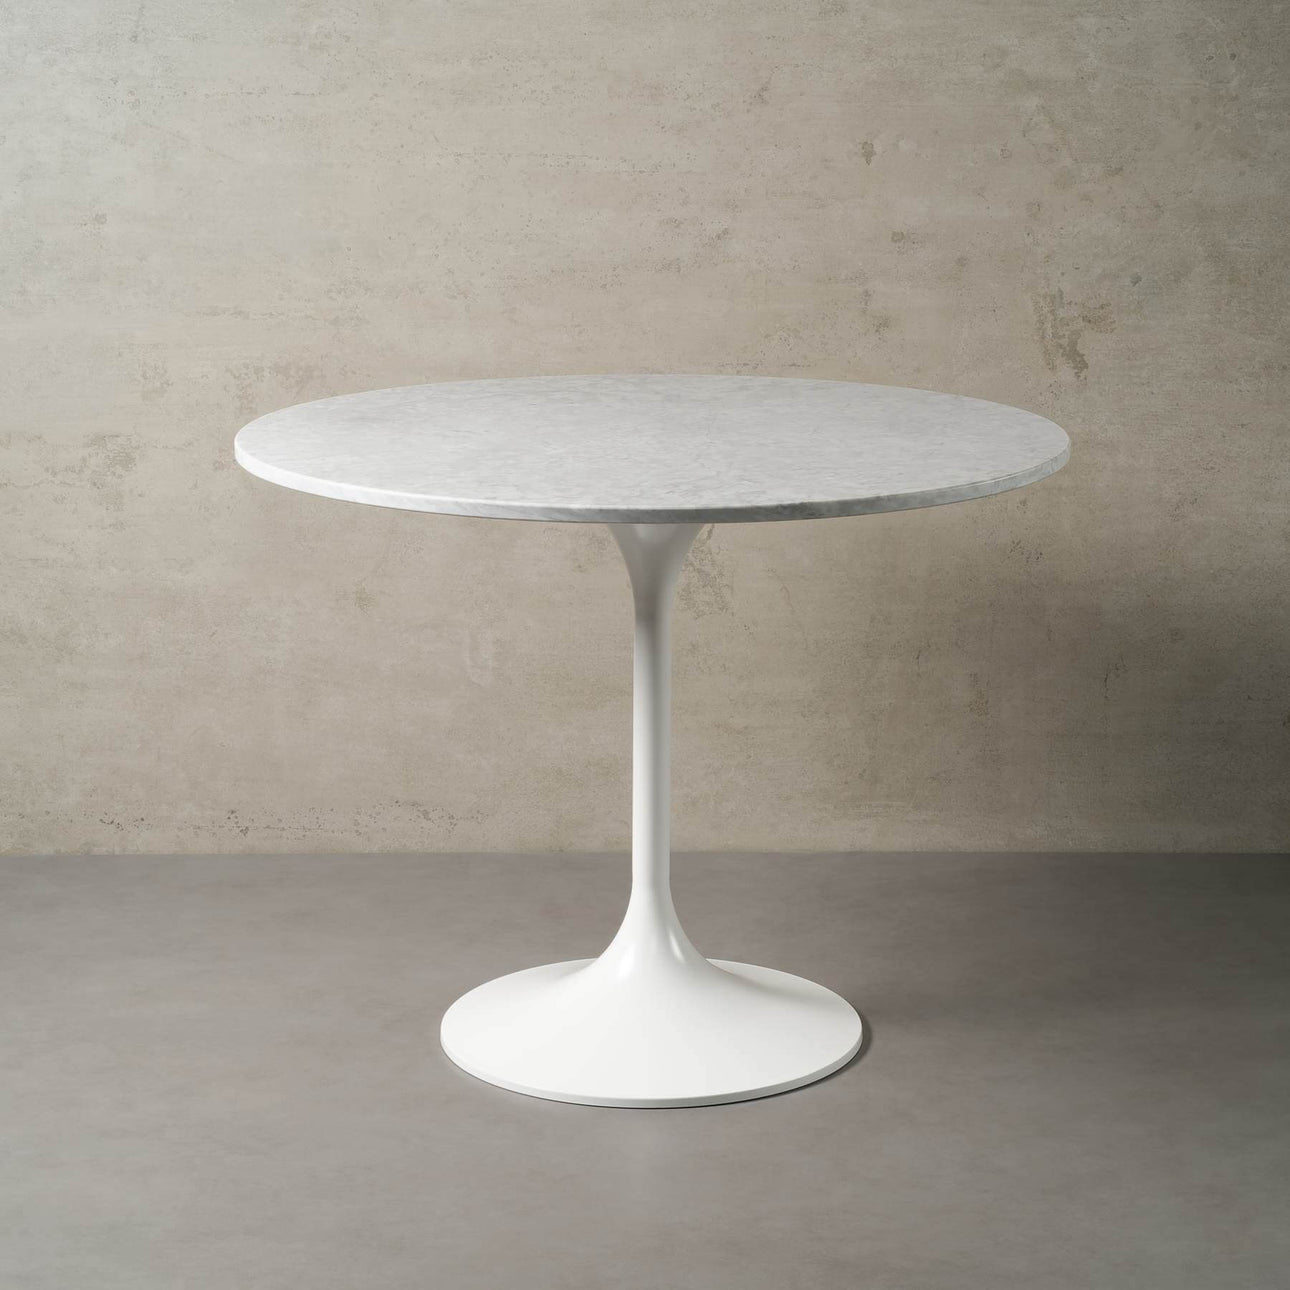 Tokyo marble dining table